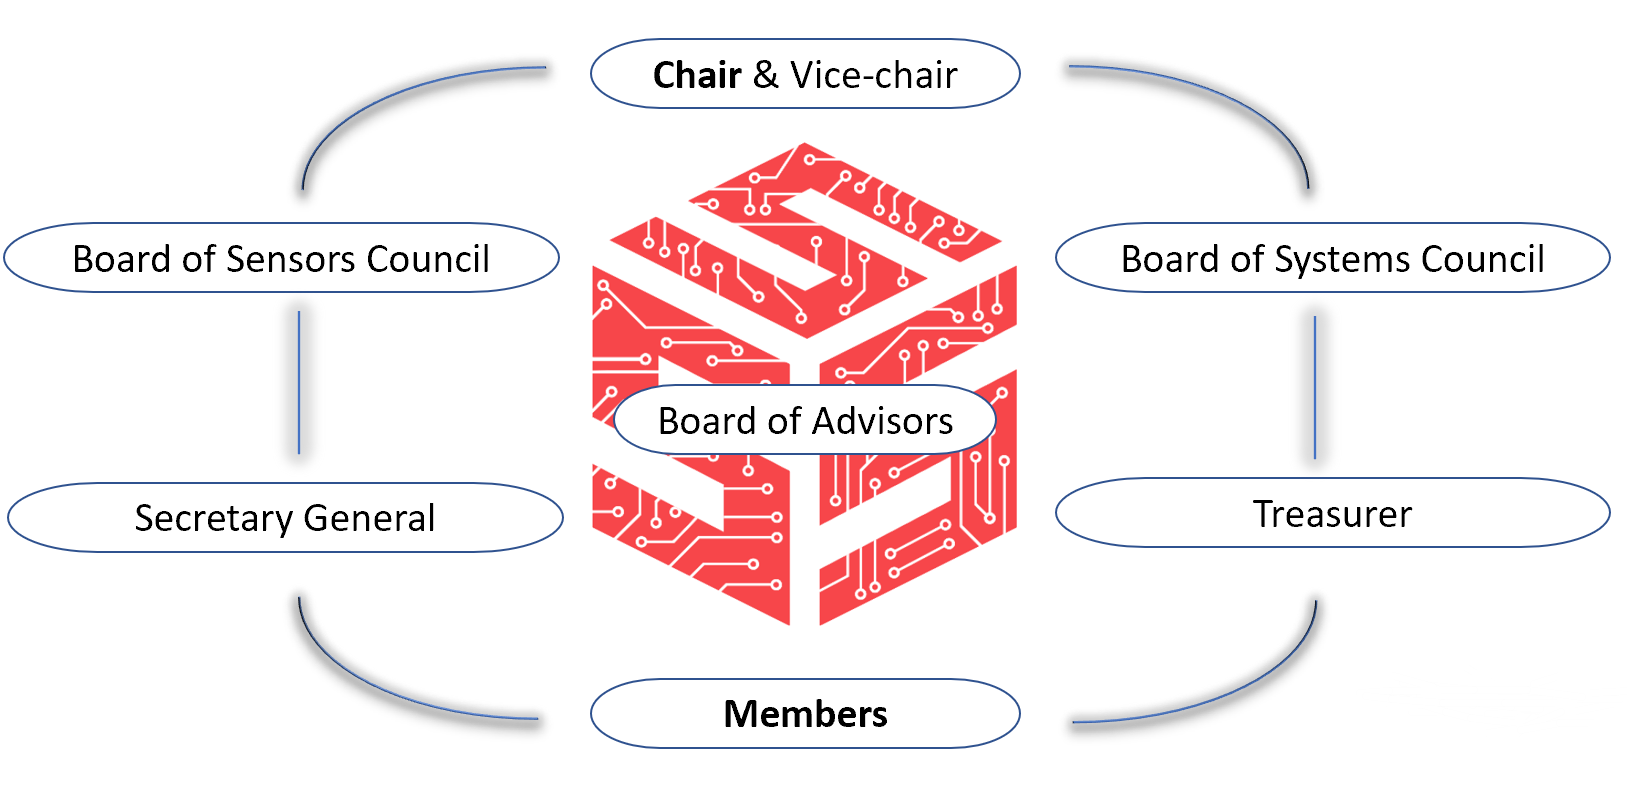 The structure of the committee